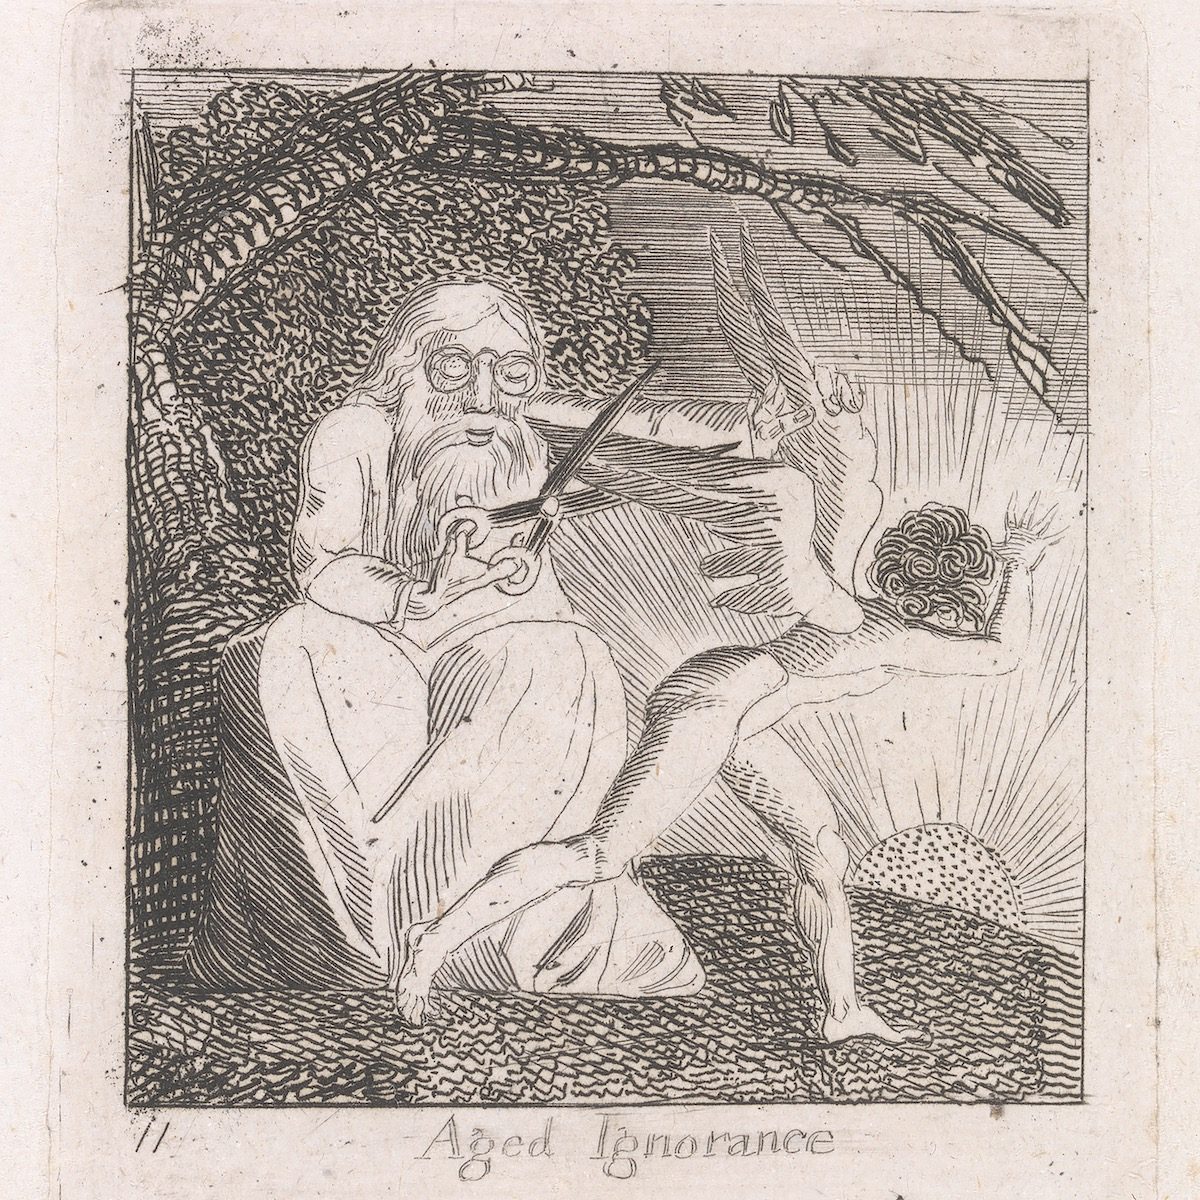 For Children. The Gates of Paradise, Plate 13, "Aged Ignorance"